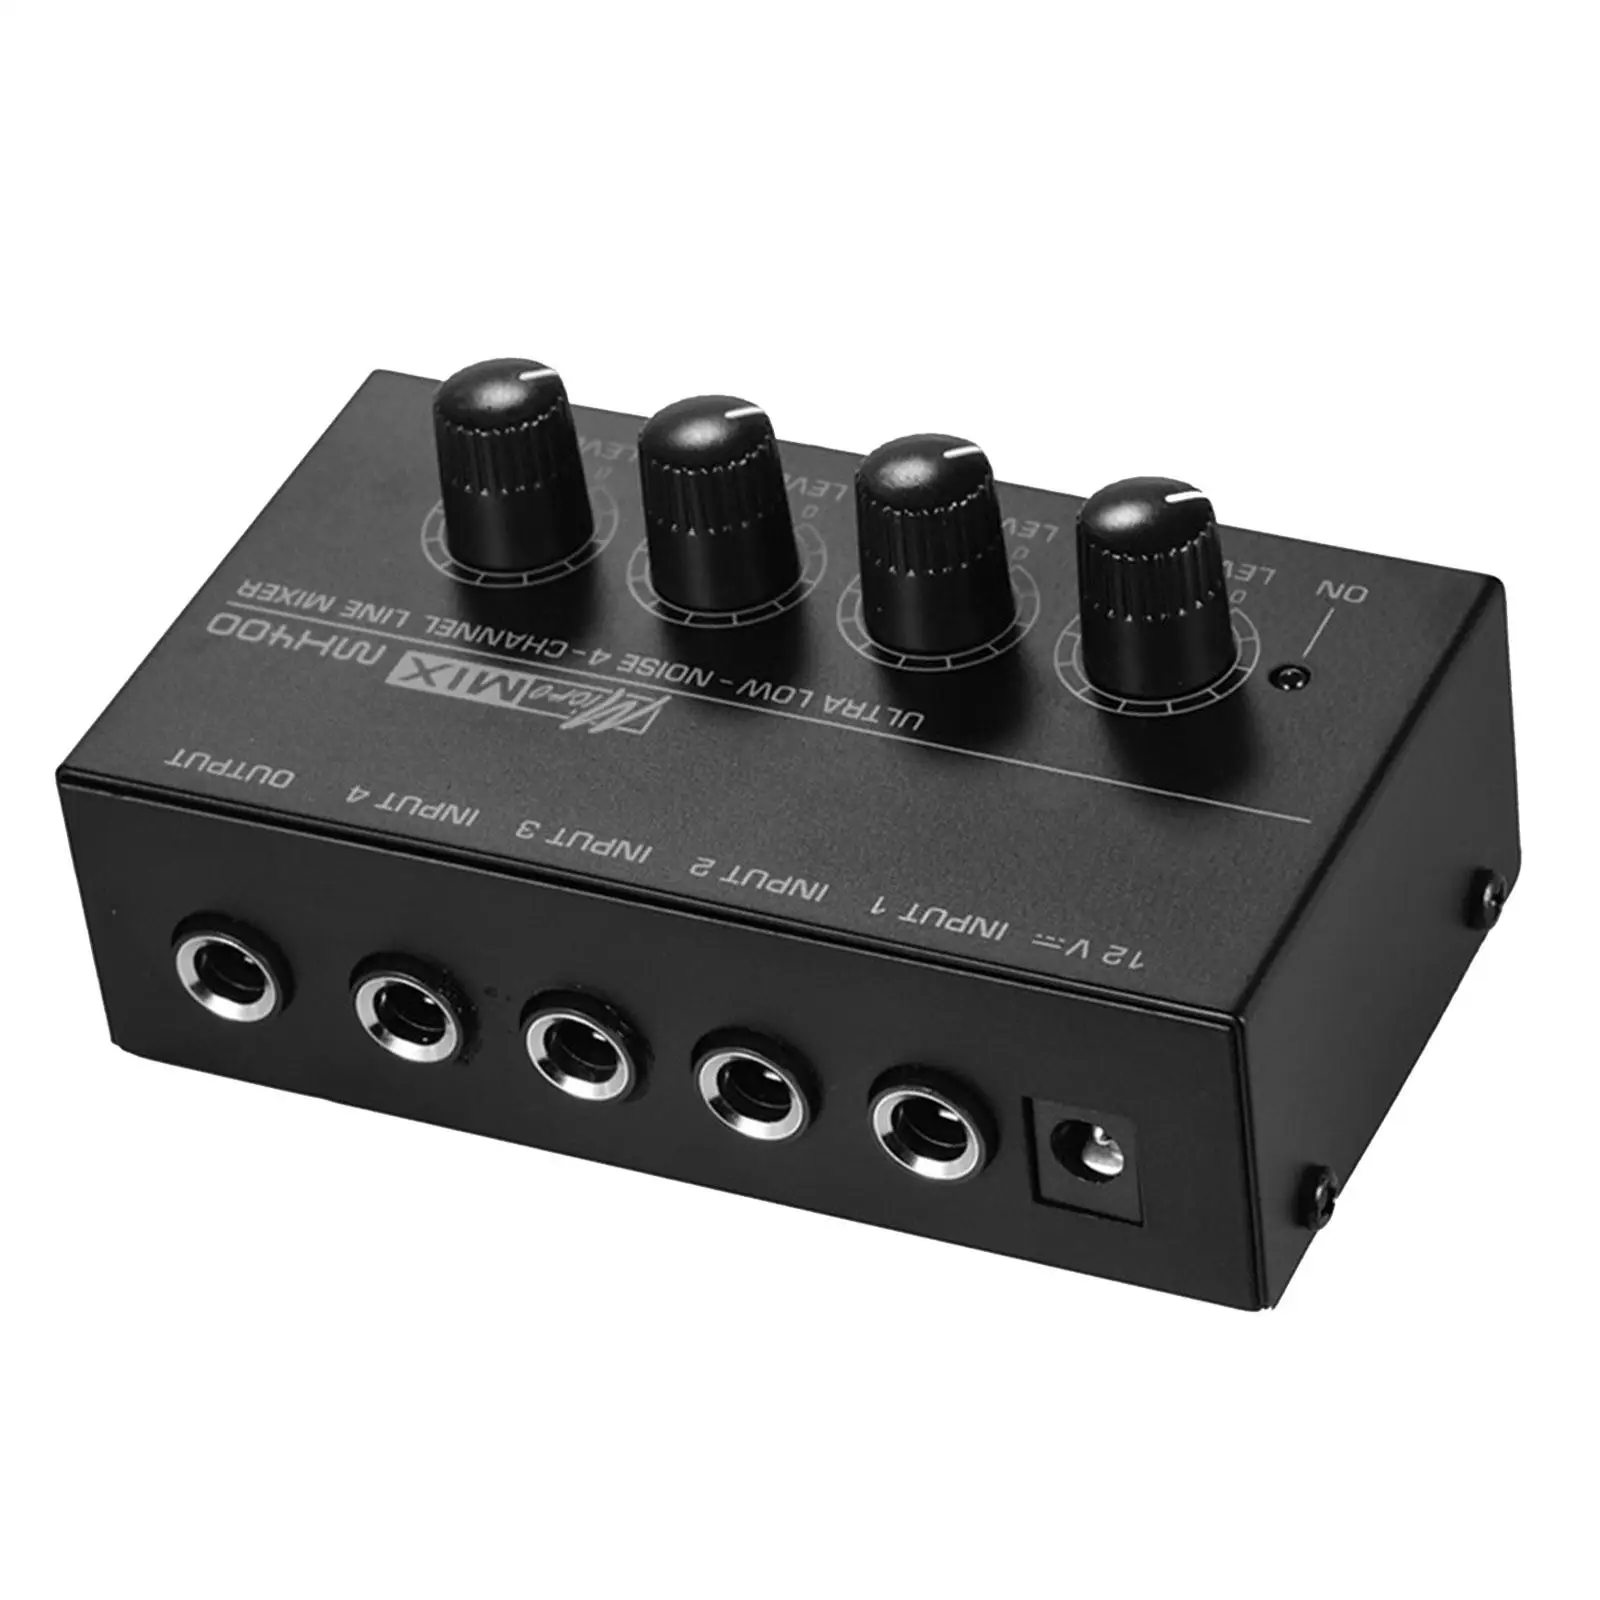 4 Channel Audio Mixer Mini Equalizer Music Recording Equipment Digital DJ Console for Small Clubs Outdoor Home Guitars Keyboards